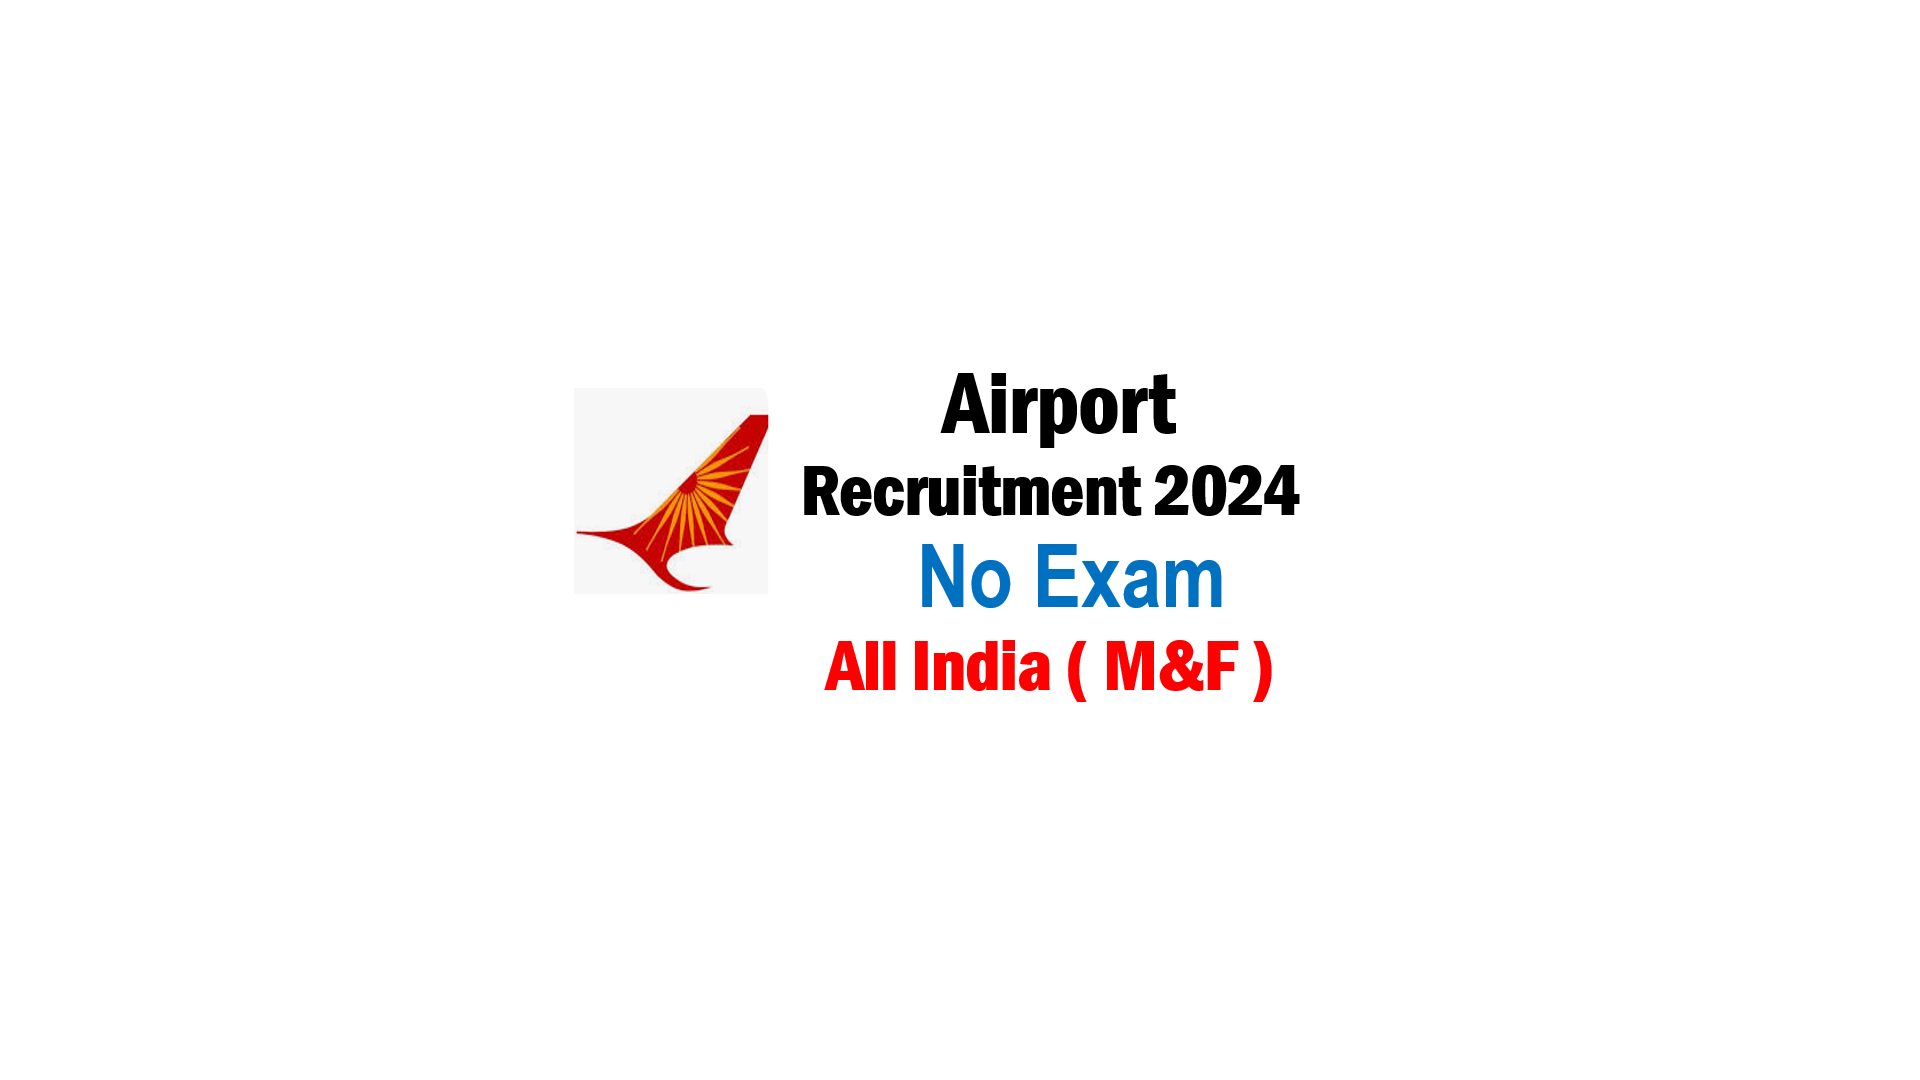 Airport Air India Recruitment 2024 Vacancies New Notification out